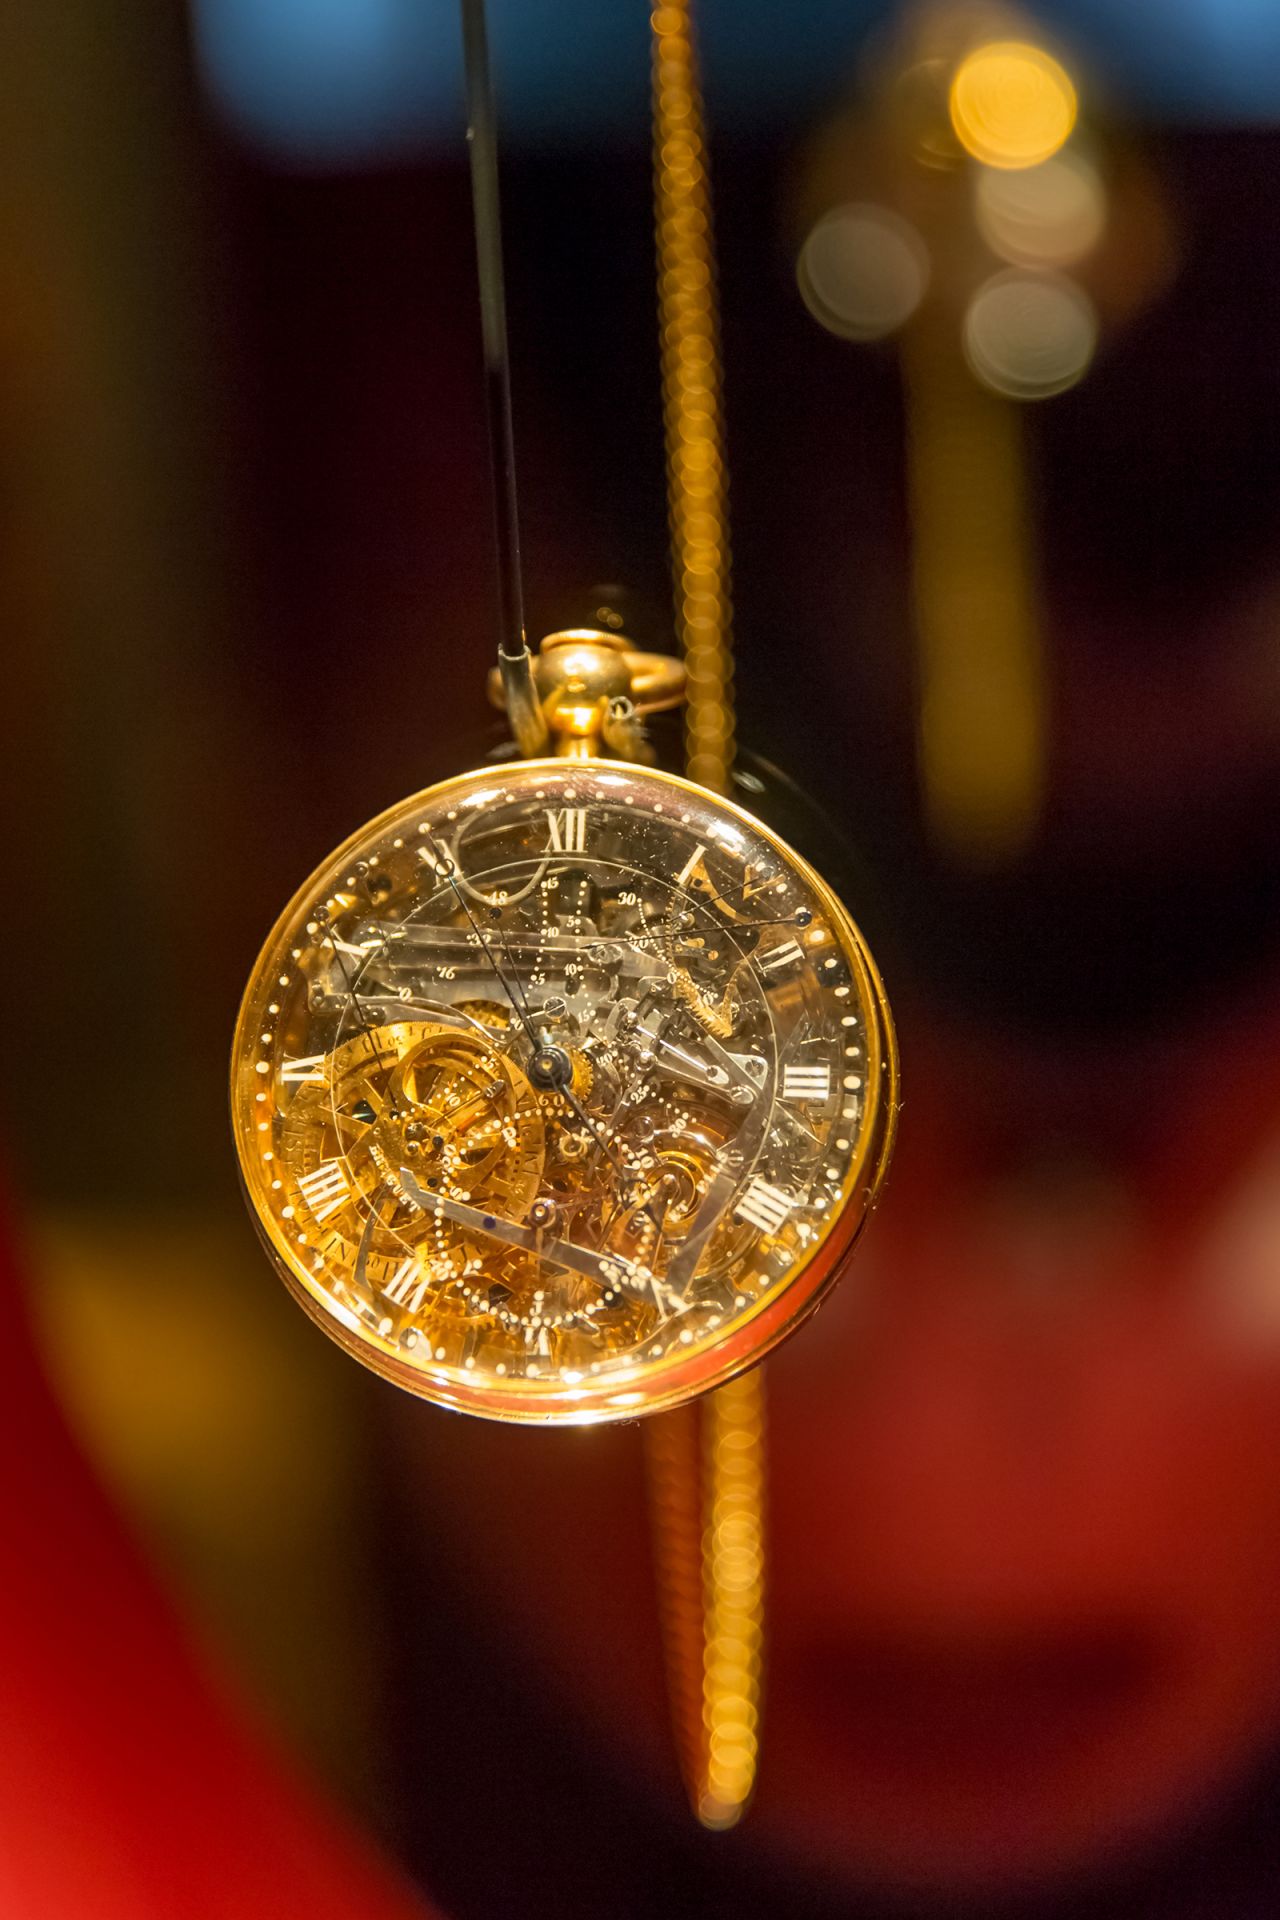 Тhe Breguet No. 160 grand complication, more commonly known as the Marie-Antoinette or the Queen